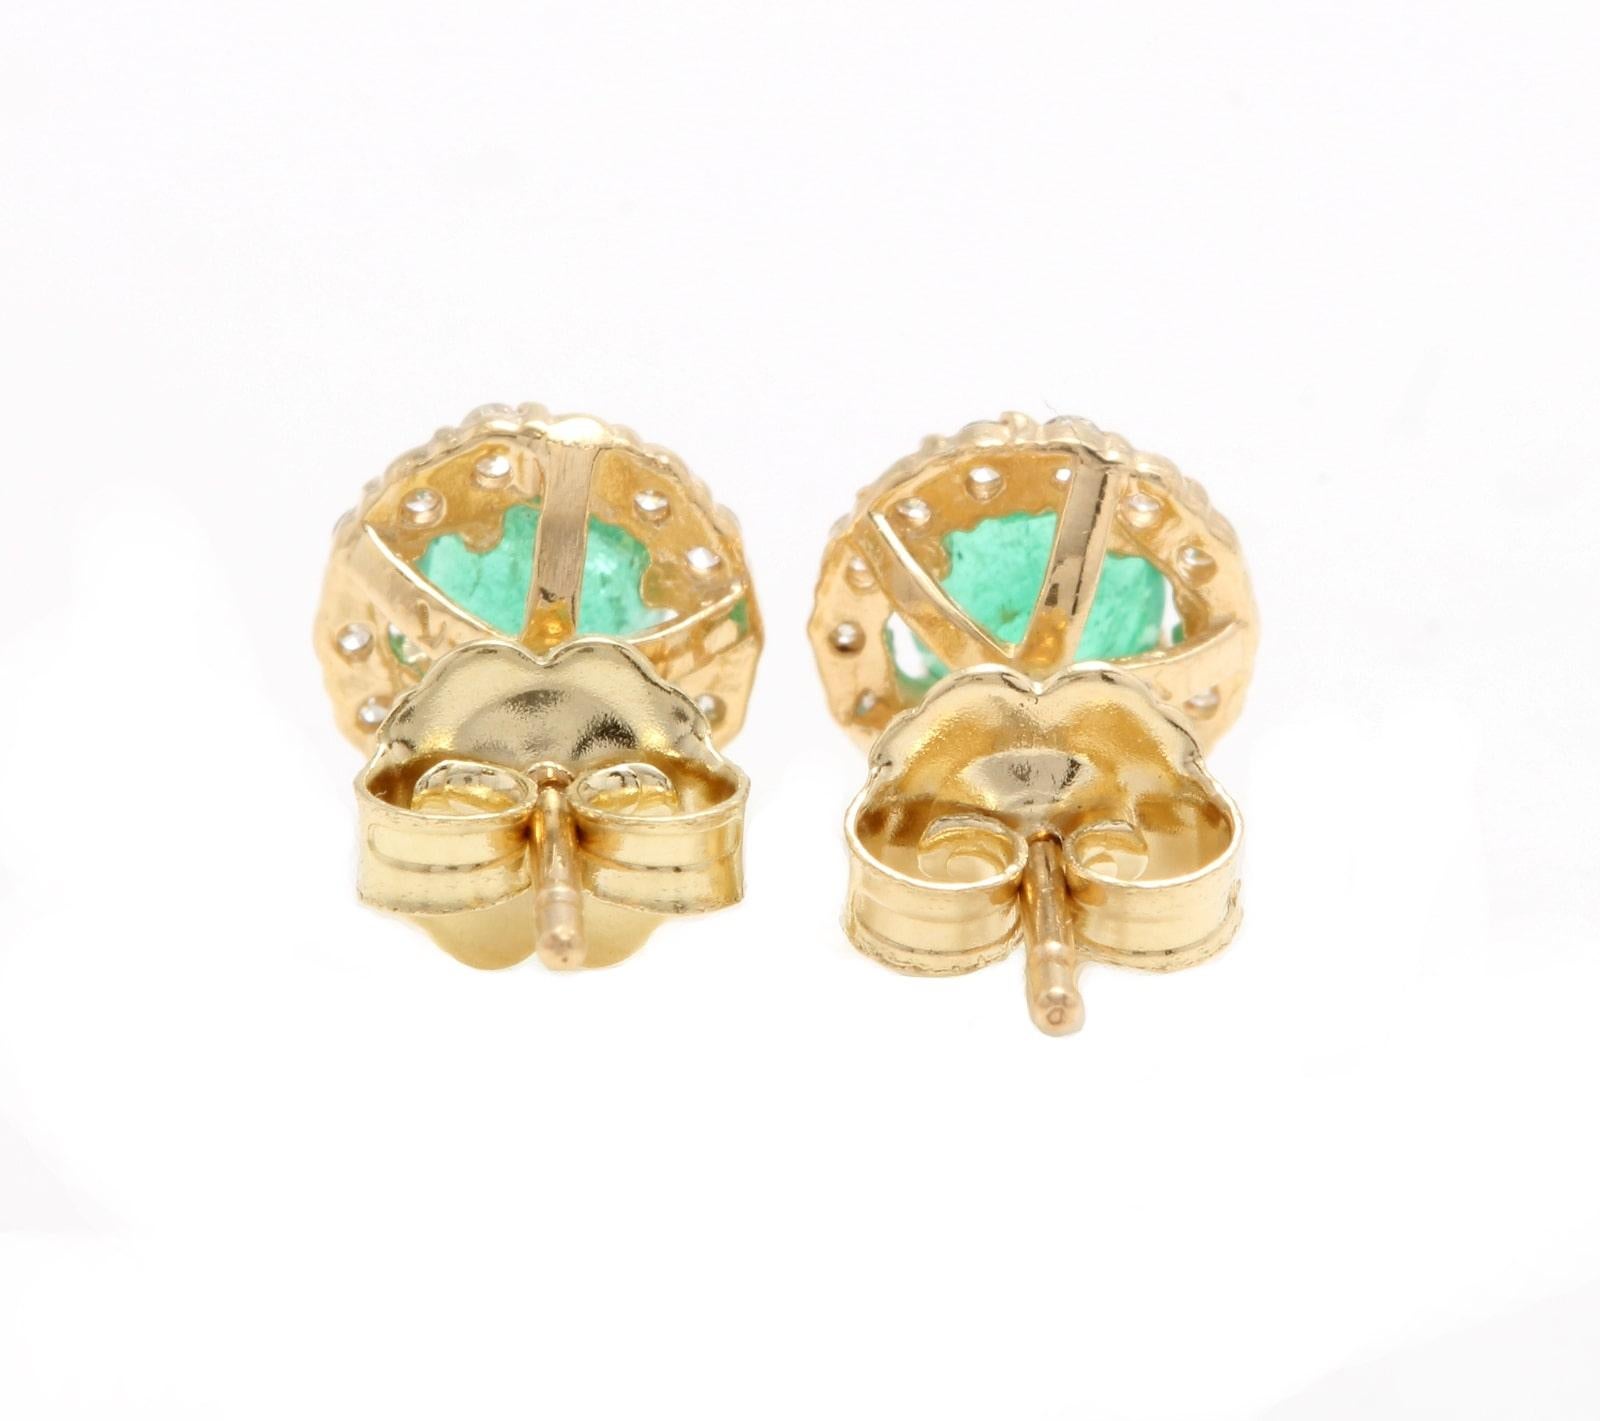 1.00 Carat Natural Emerald and Diamond 14K Solid Yellow Gold Earrings

Amazing looking piece! 

Suggested Replacement Value Approx. $3,000.00

Total Natural Round Cut White Diamonds Weight: Approx.  0.20 Carats (color G-H / Clarity SI1-SI2)

Total